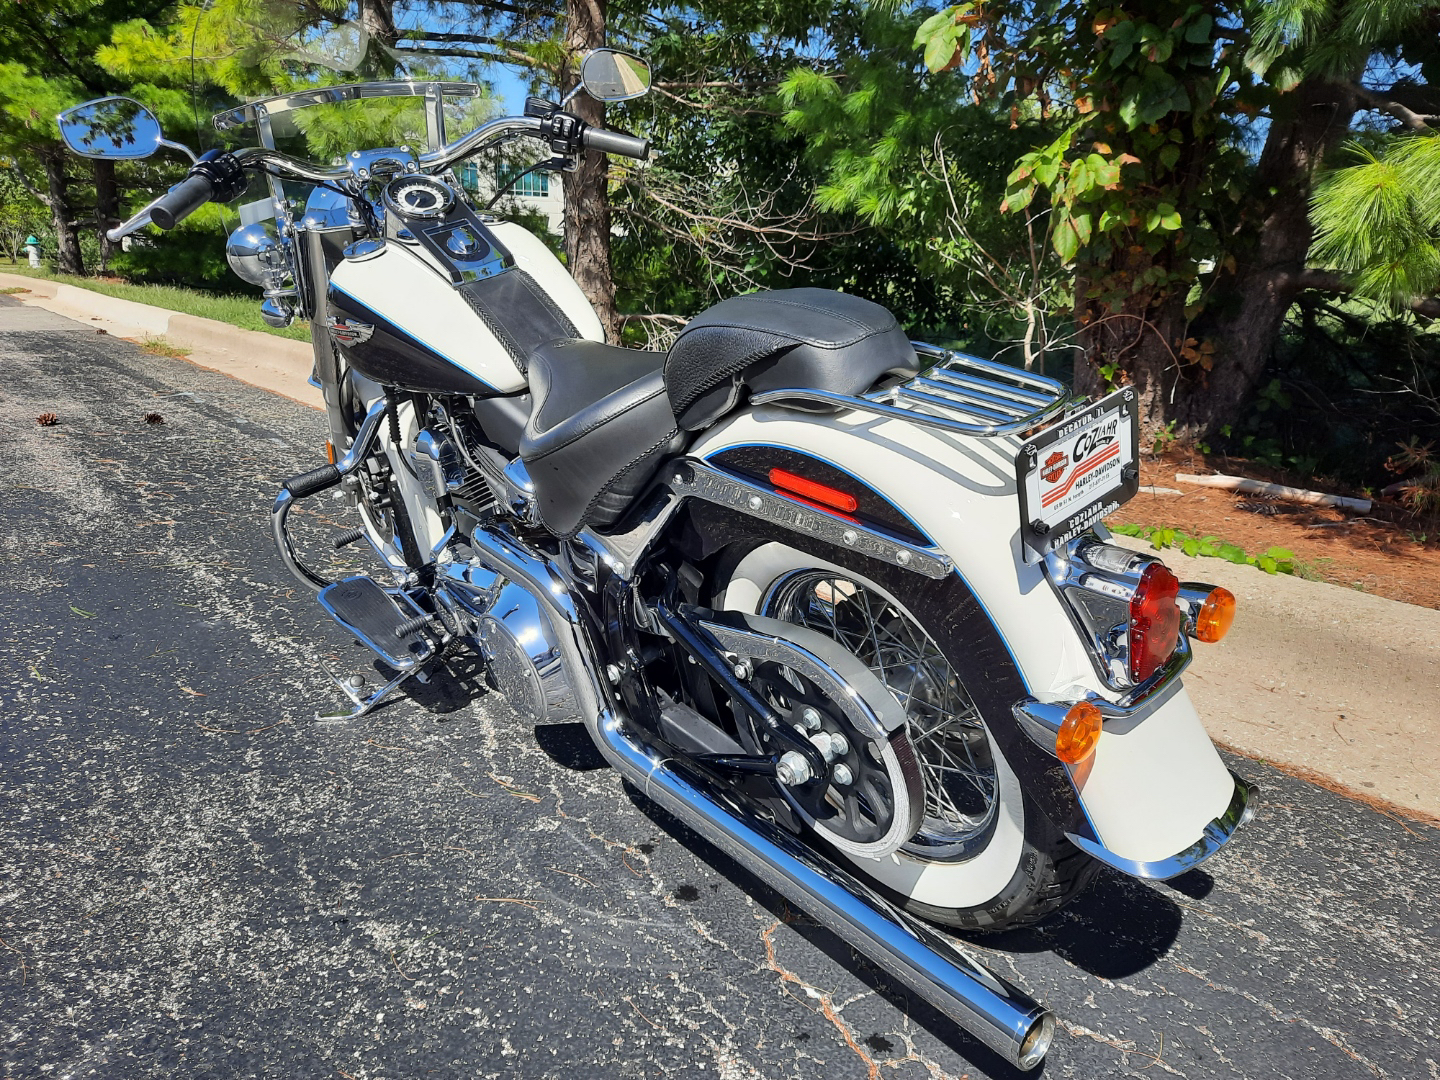 2013 Harley-Davidson Softail® Deluxe in Forsyth, Illinois - Photo 6